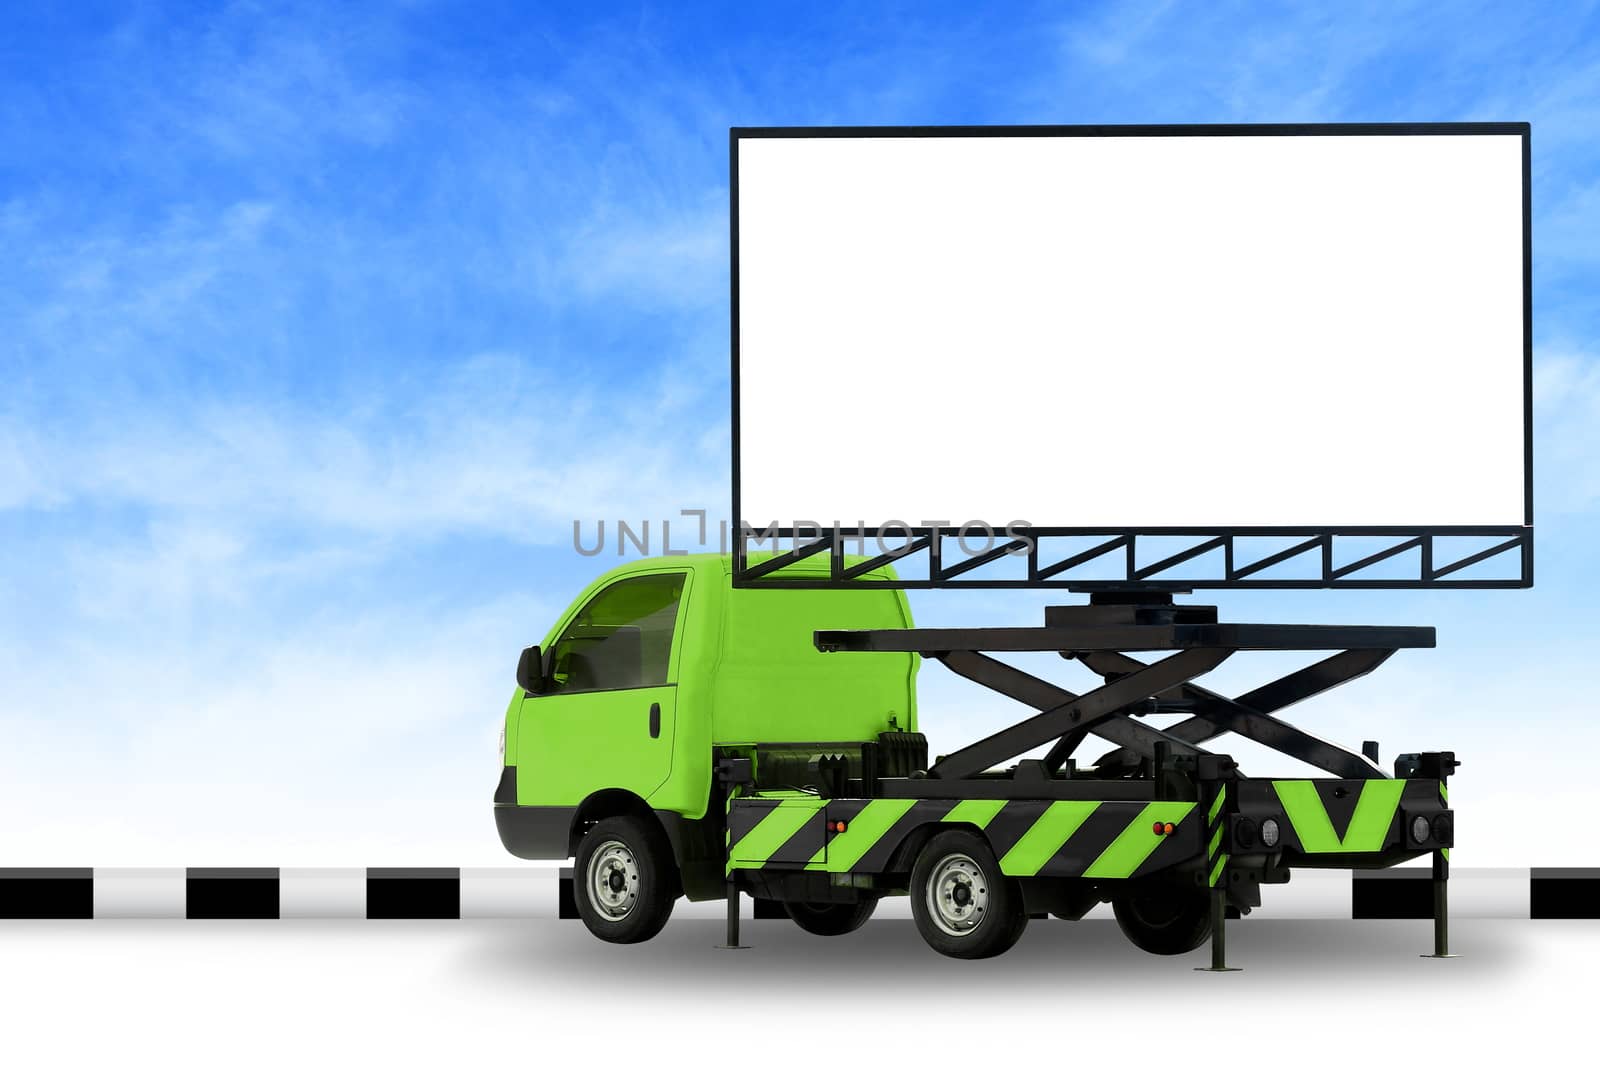 Billboard blank on car green truck LED panel for sign Advertising isolated on background sky, Large banner and billboard Roadside for an advertisement large